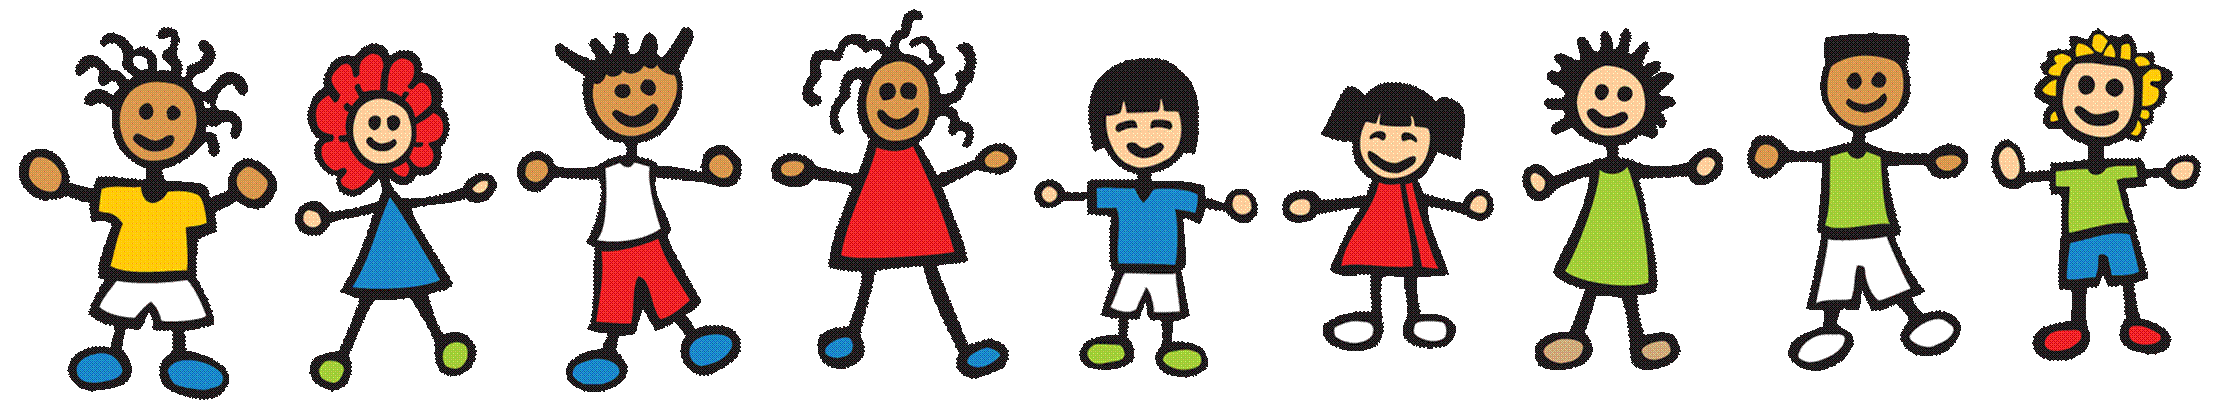 Children Helping Each Other Clipart Background 1 HD Wallpapers ...